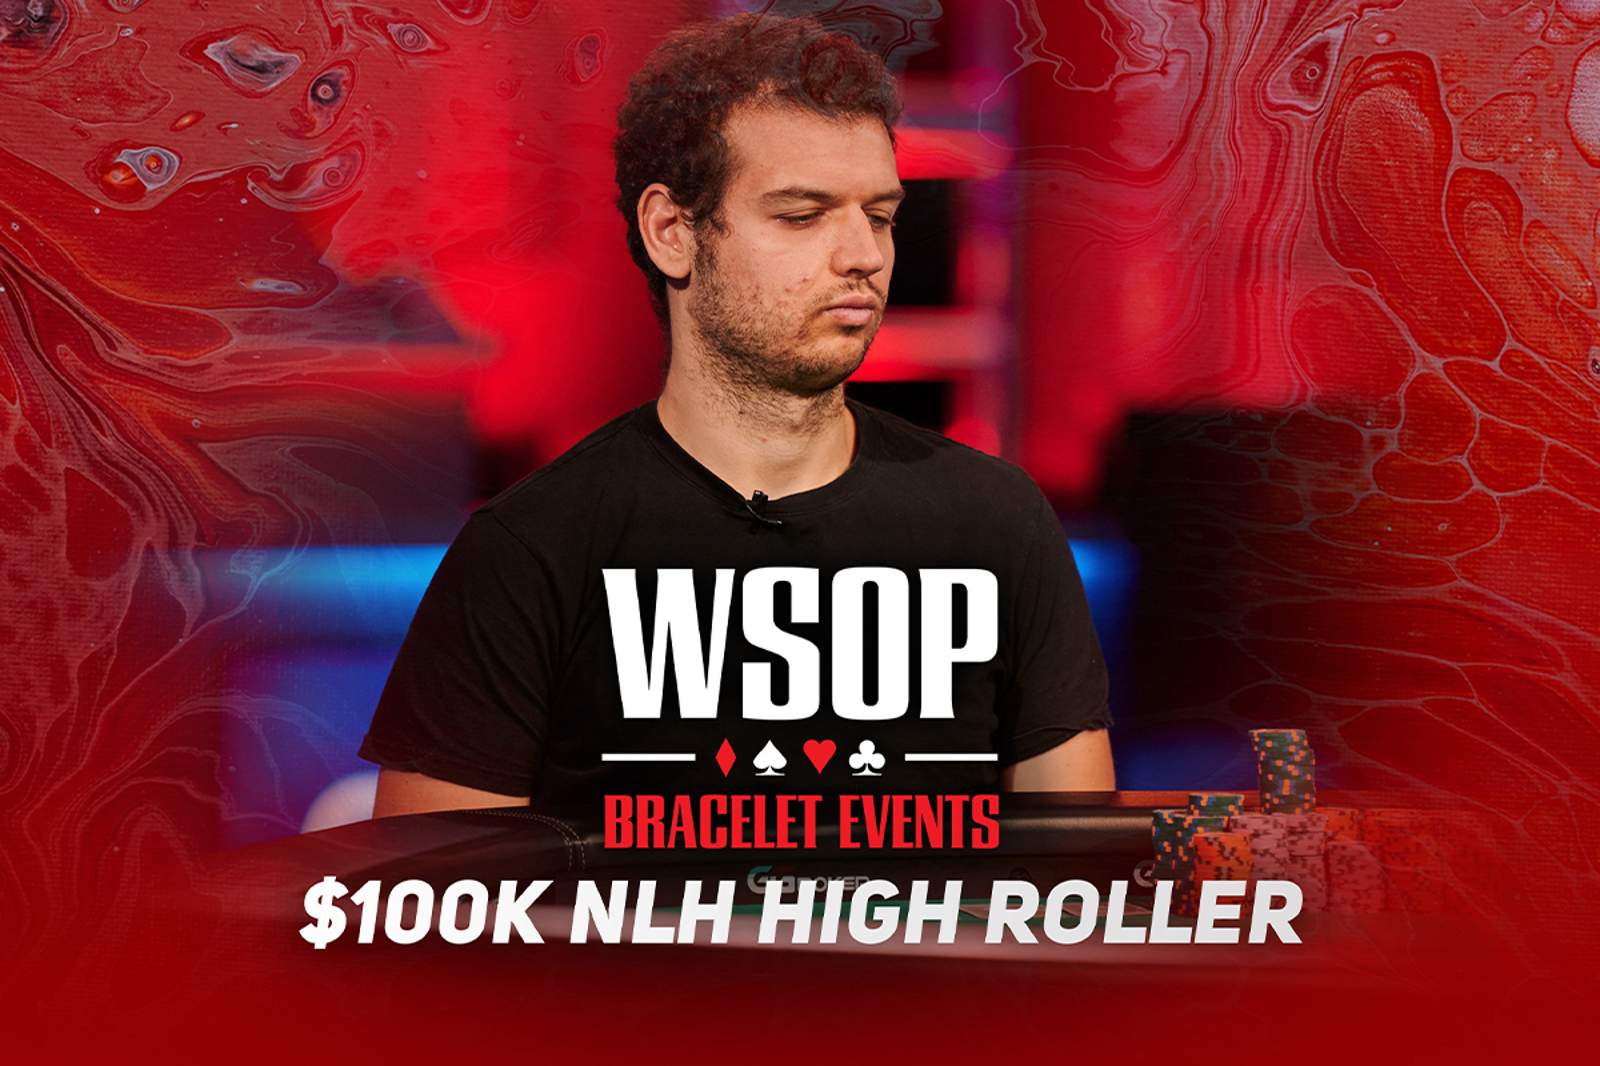 Watch the WSOP Event #87: $100K High Roller Final Table on PokerGO.com at 8 p.m. ET